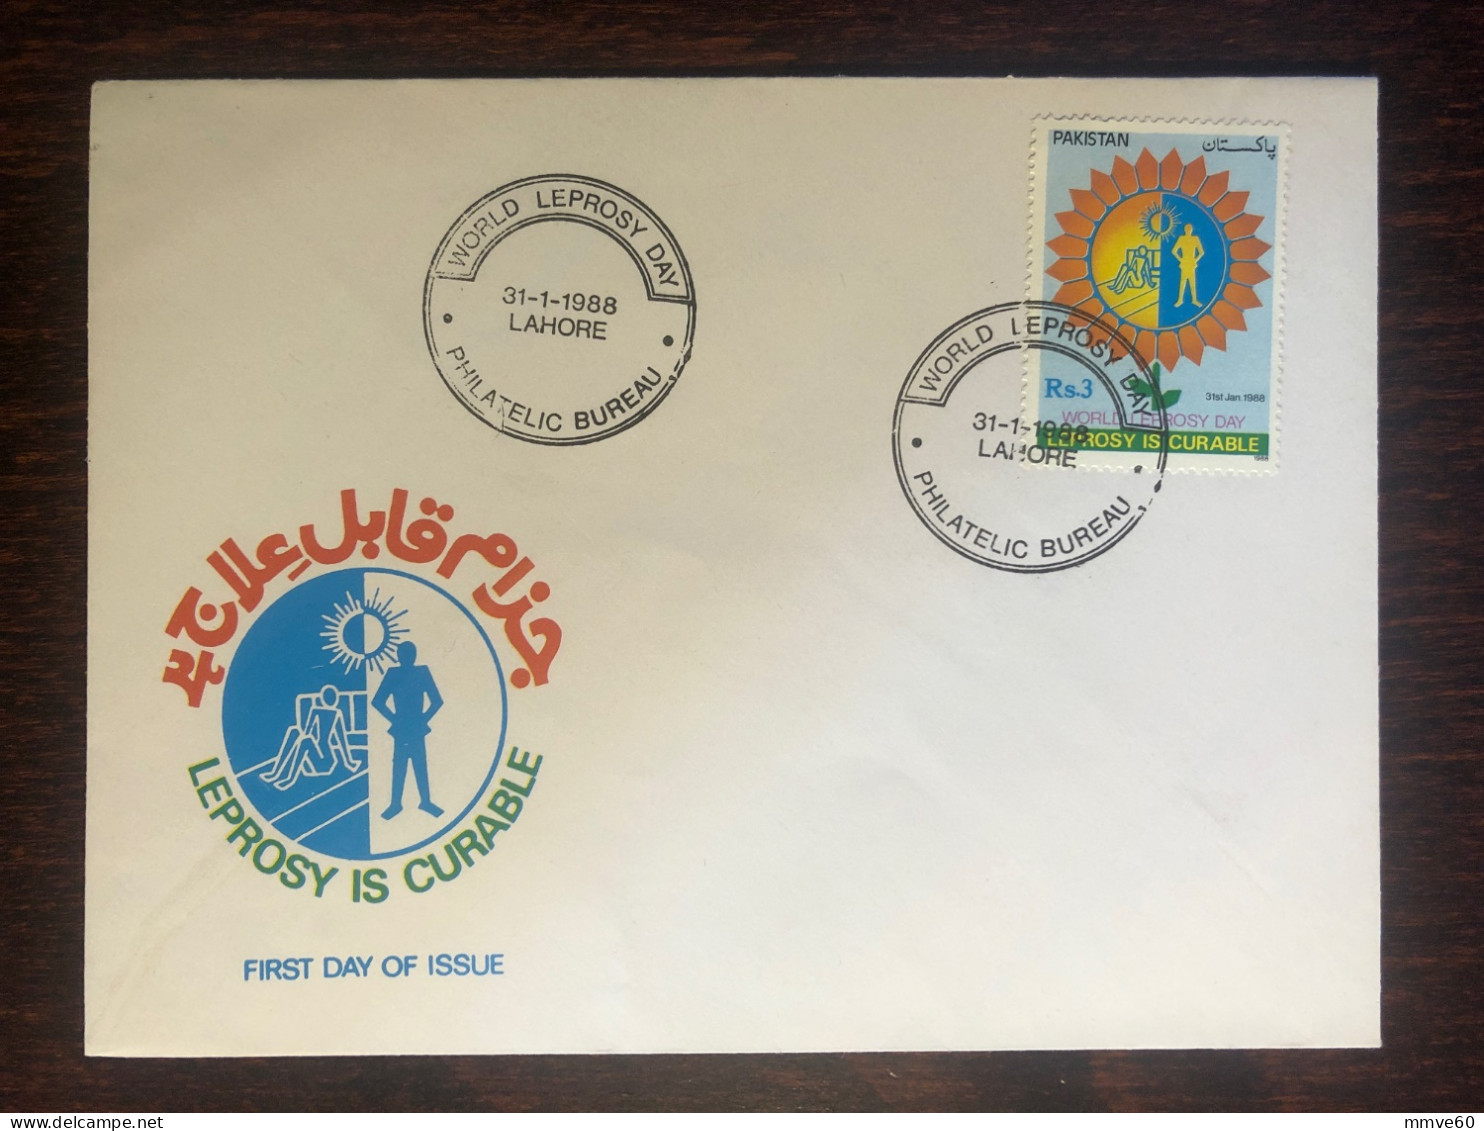 PAKISTAN FDC COVER 1988 YEAR LEPROSY LEPRA HEALTH MEDICINE STAMPS - Pakistan